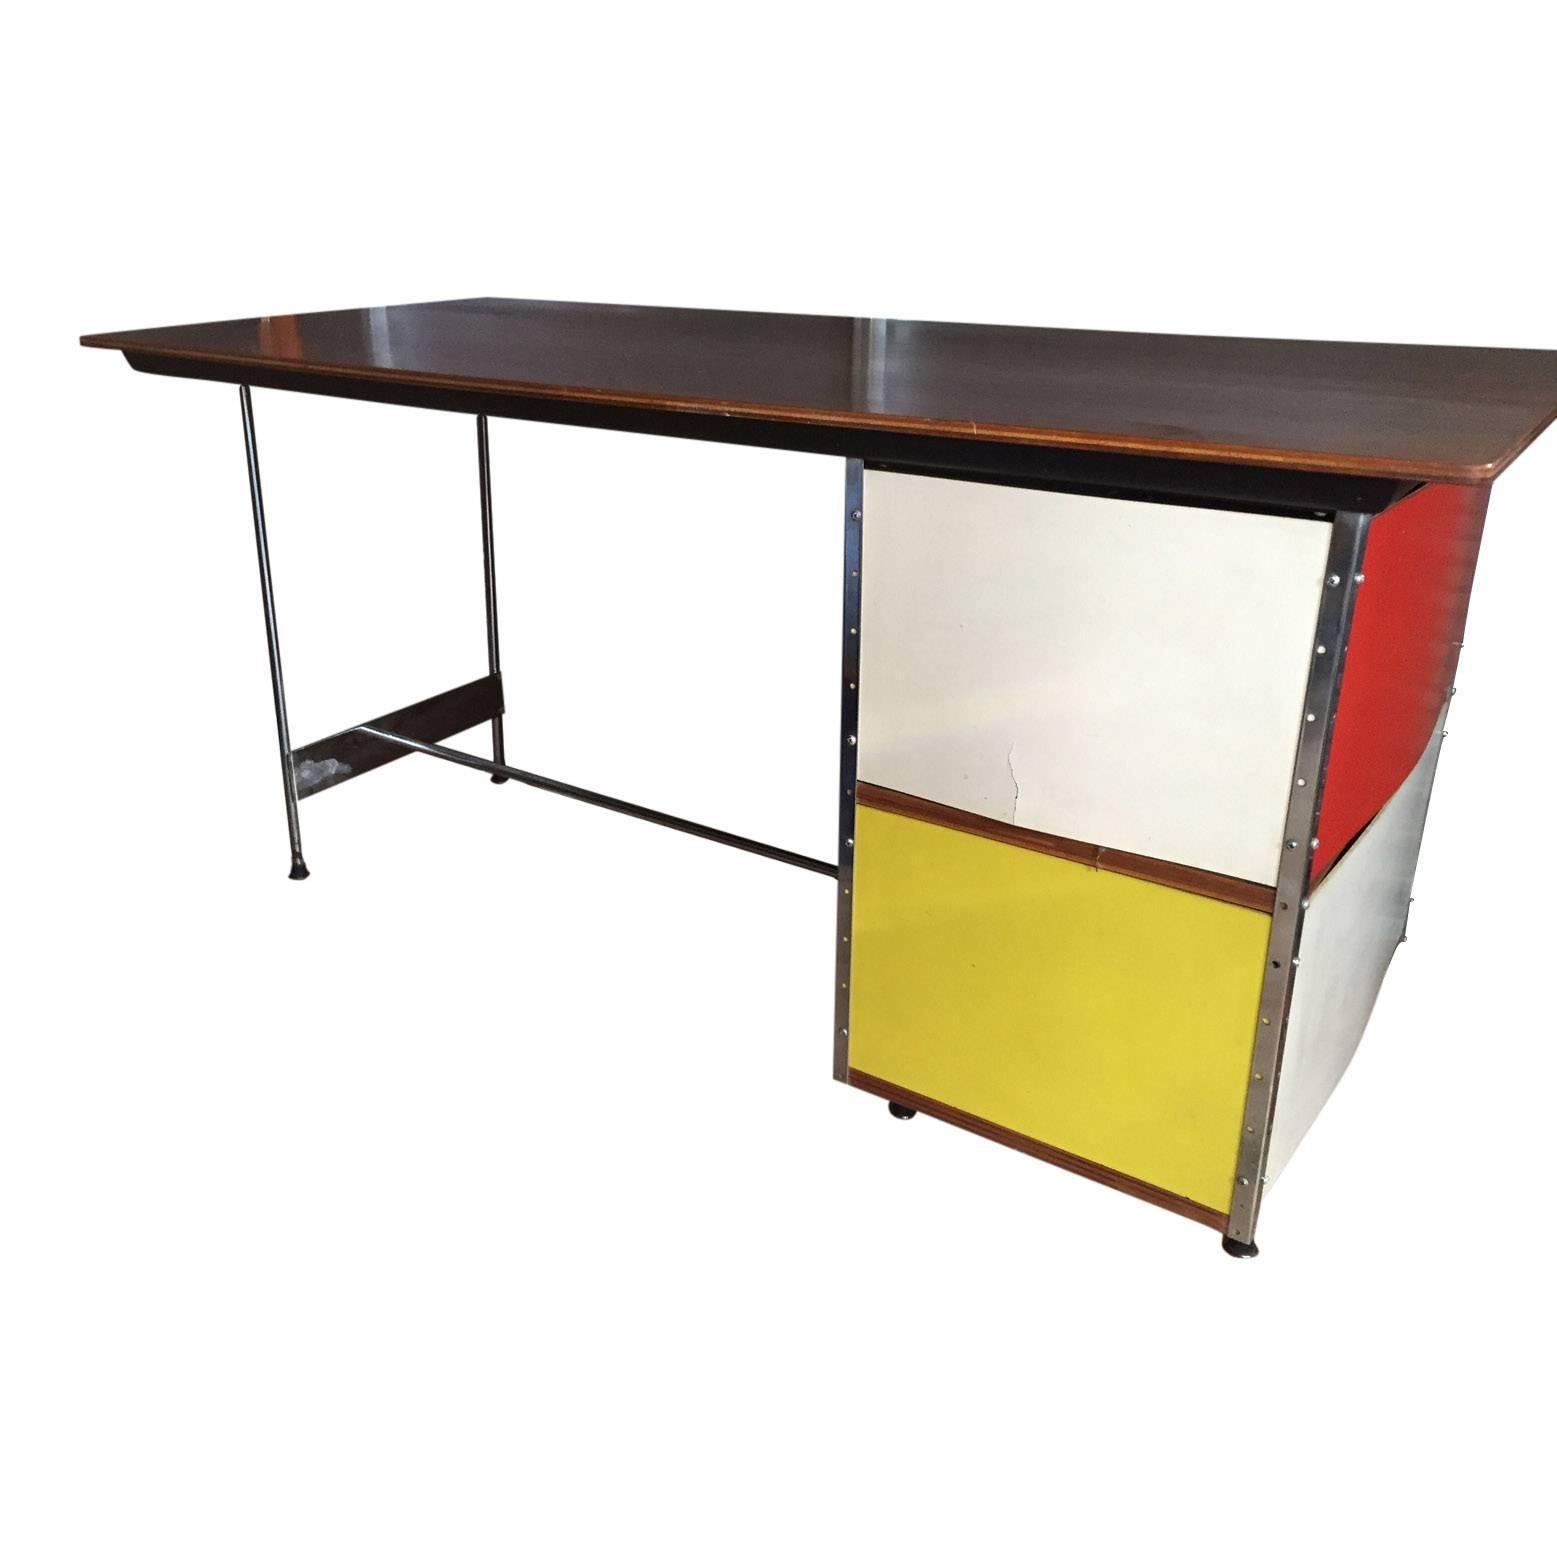 For your consideration is an icon of Mid-Century and Eames design the E.S.U. desk (also known as the EDU, or 